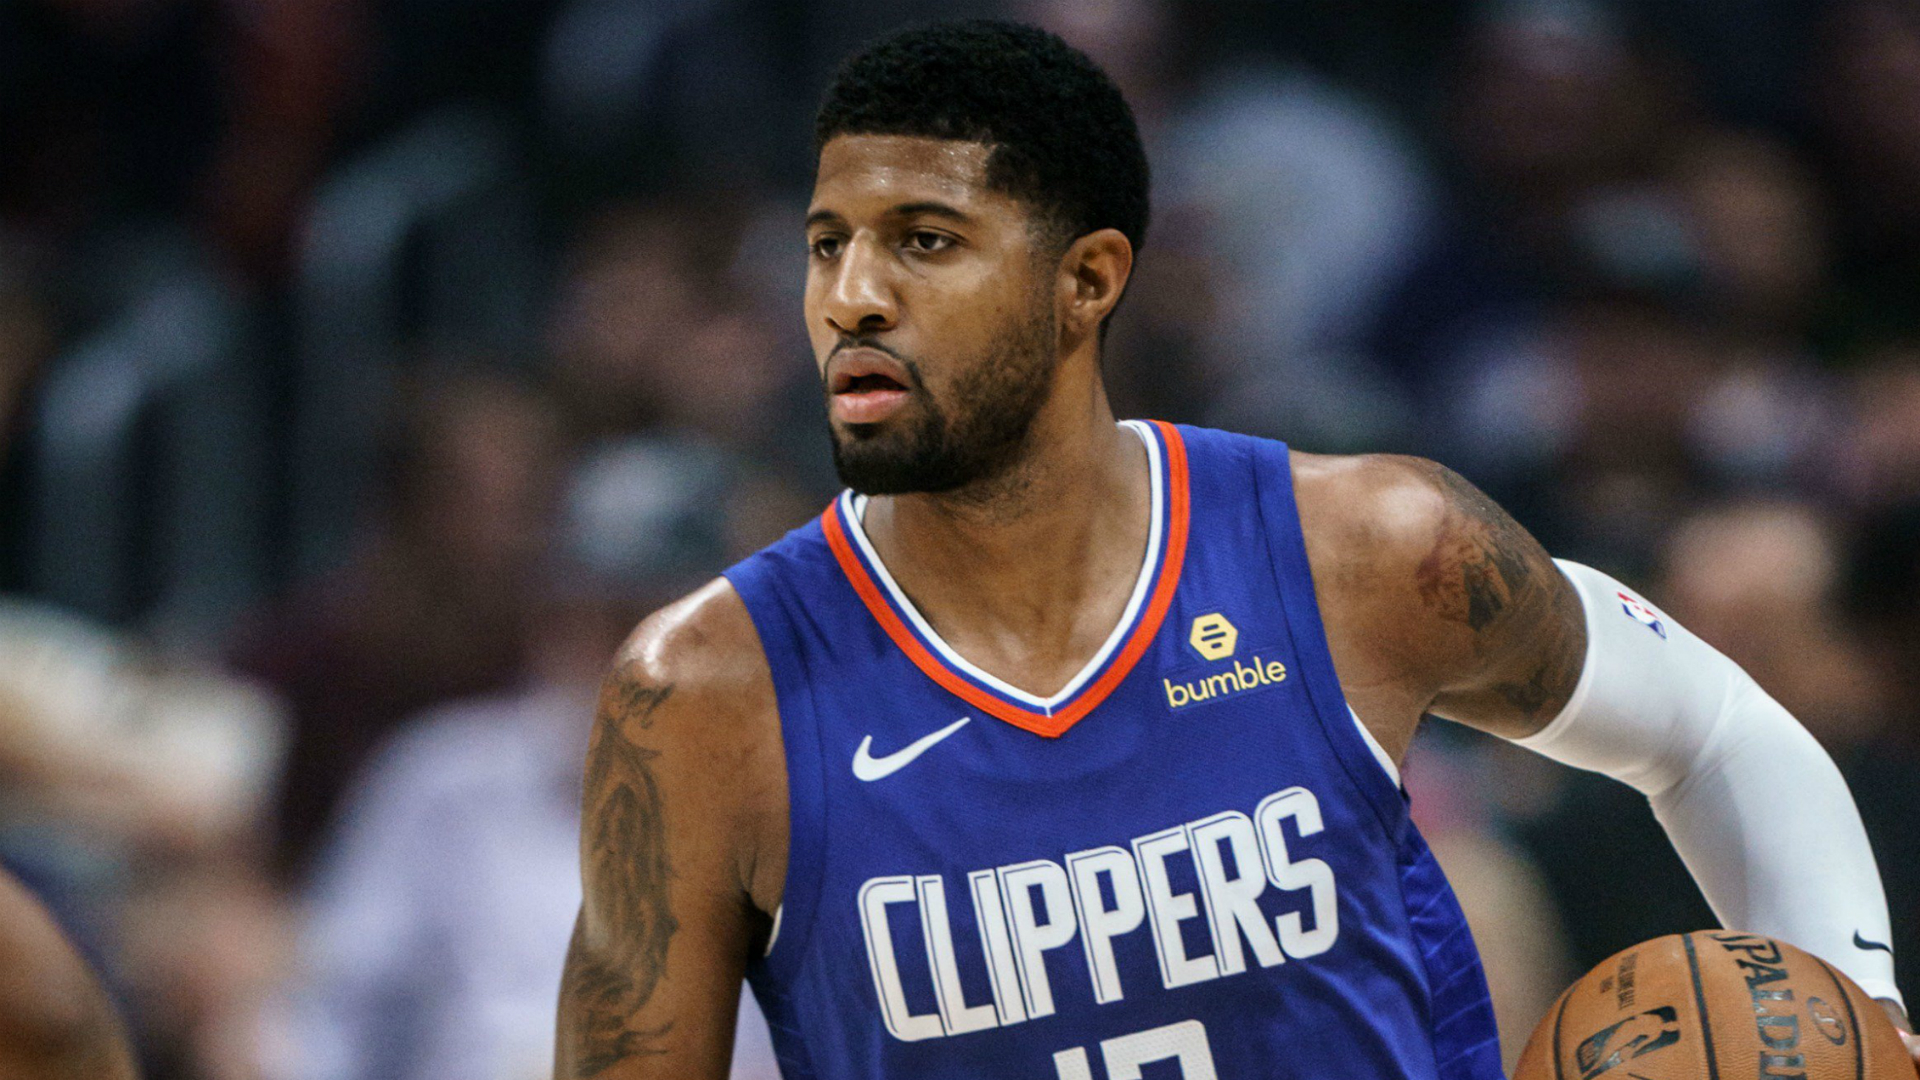 Paul George played his first game for the Clippers in Los Angeles on Saturday and he scored 37 points in just 20 minutes.